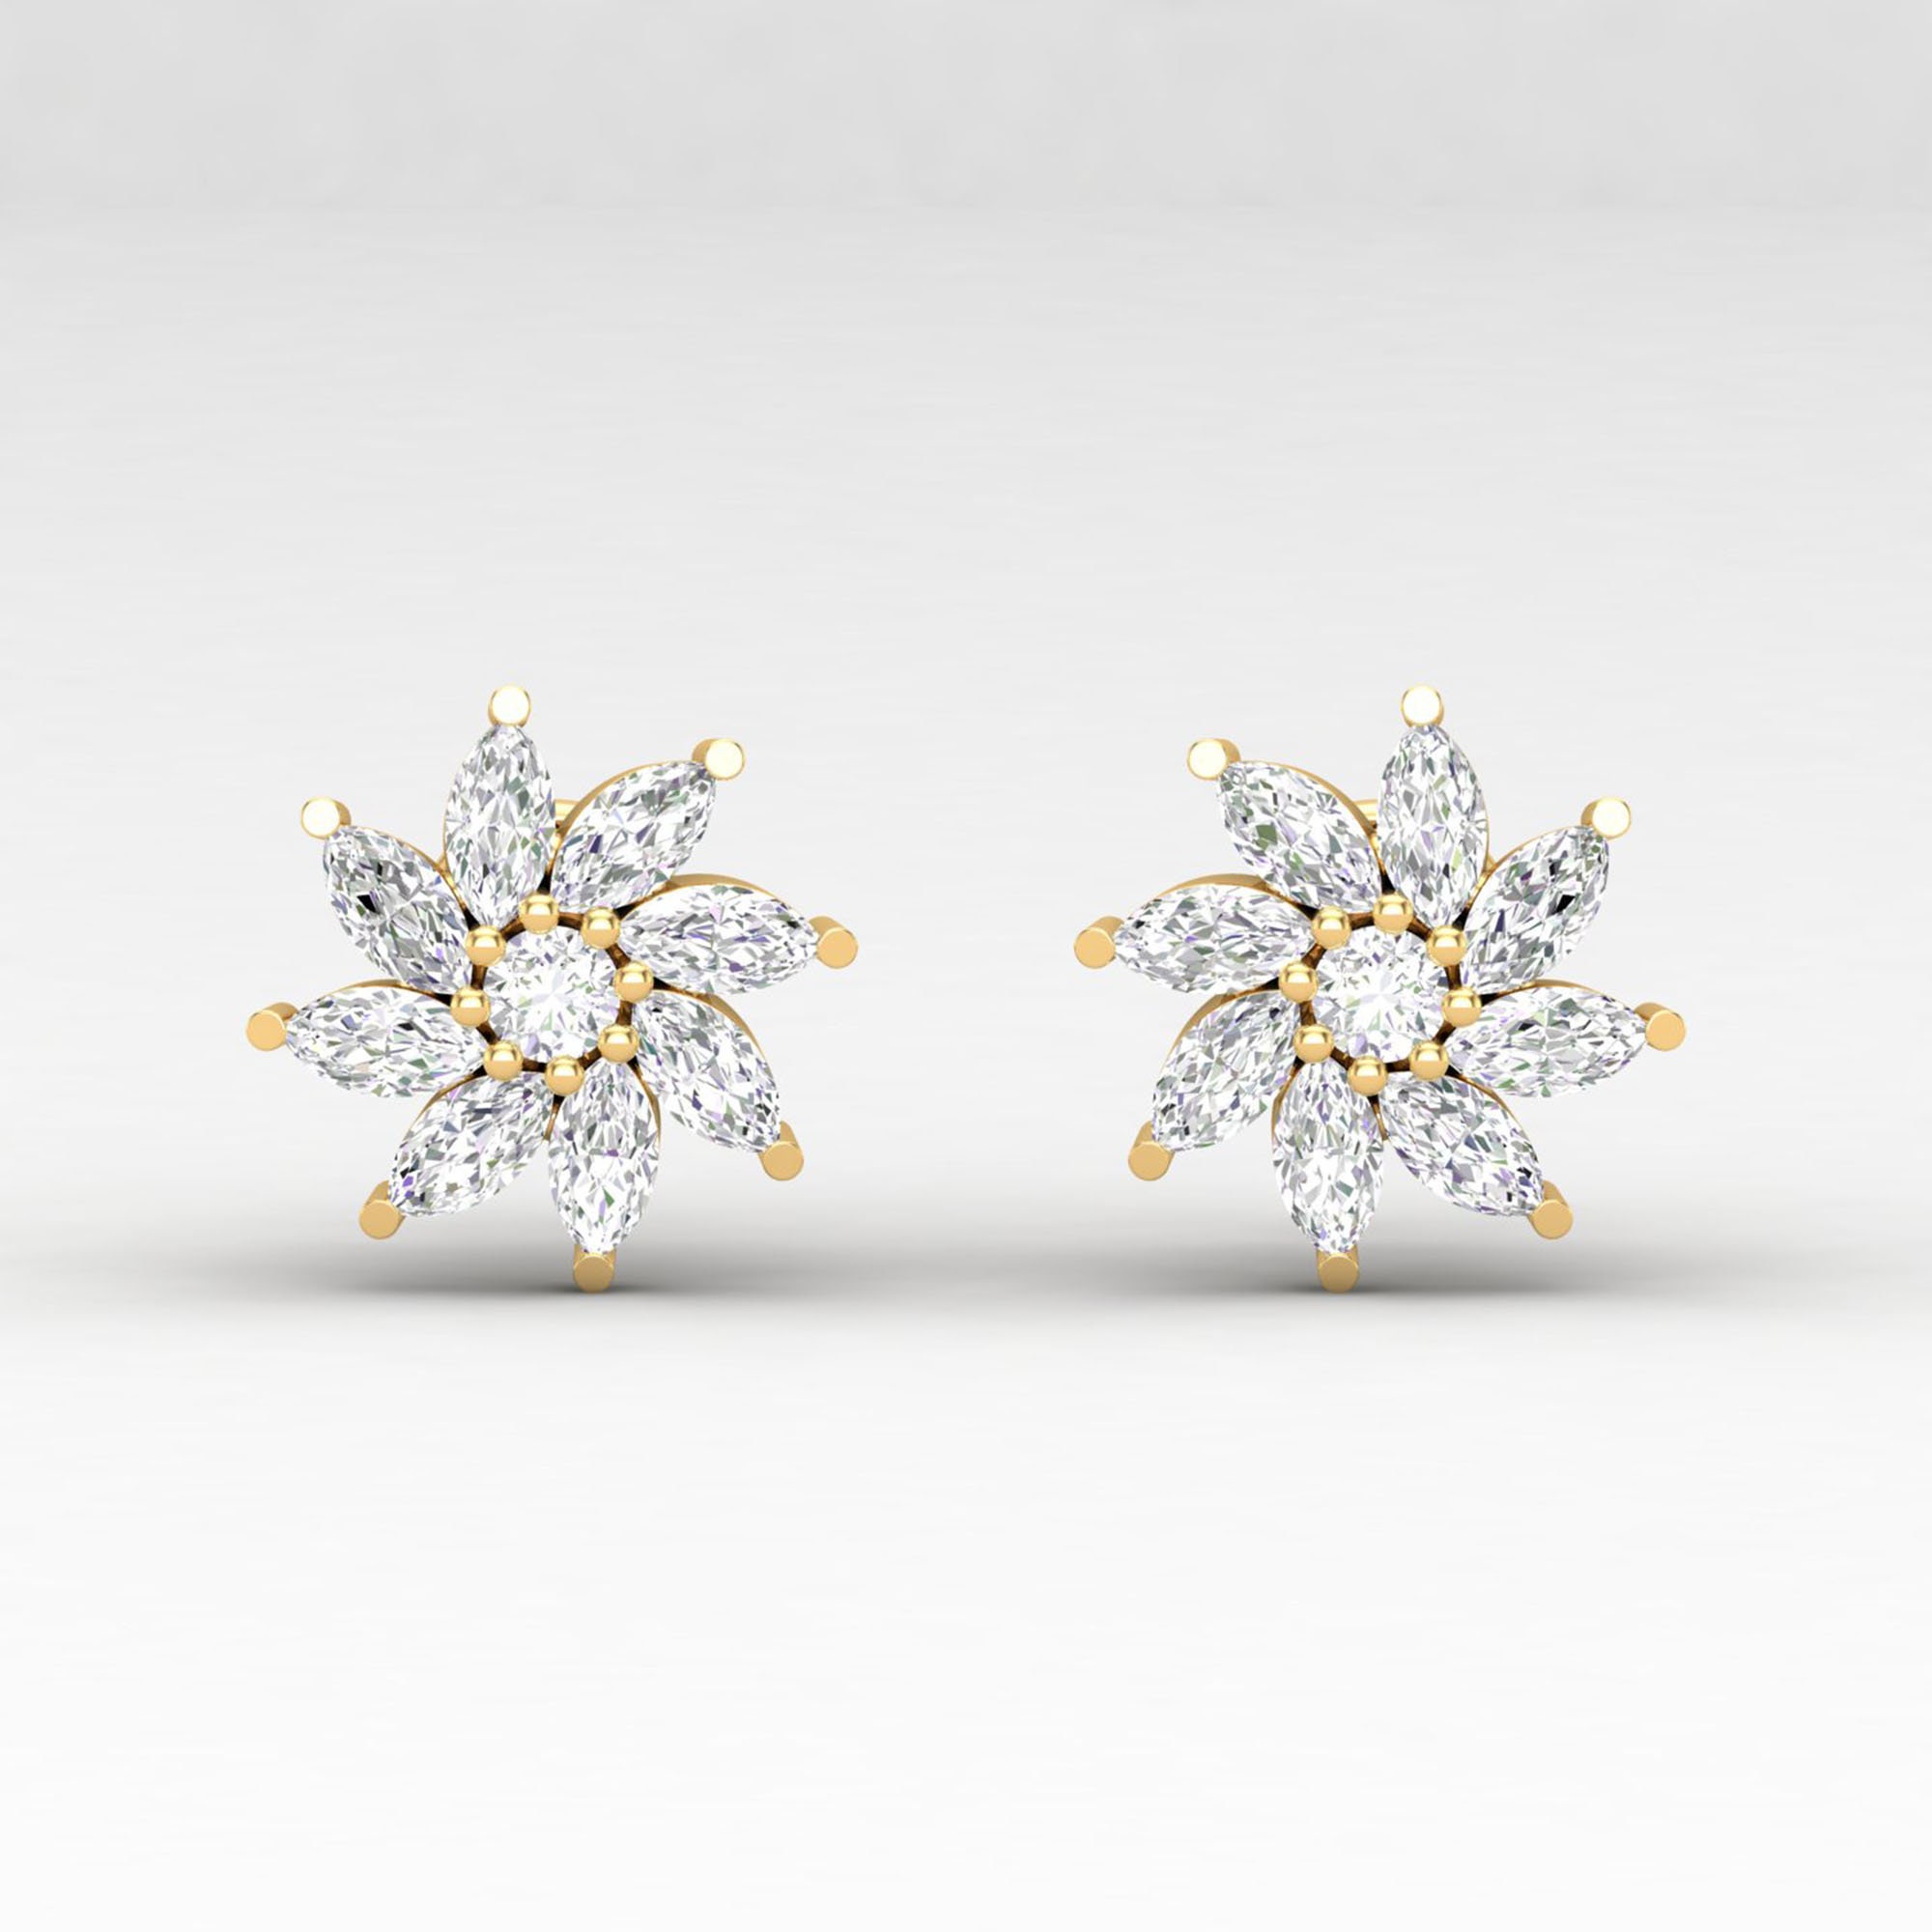 Diamond Piercing, Cartilage Earring, Gold Studs For Women, Marquise Earrings, Gift Her